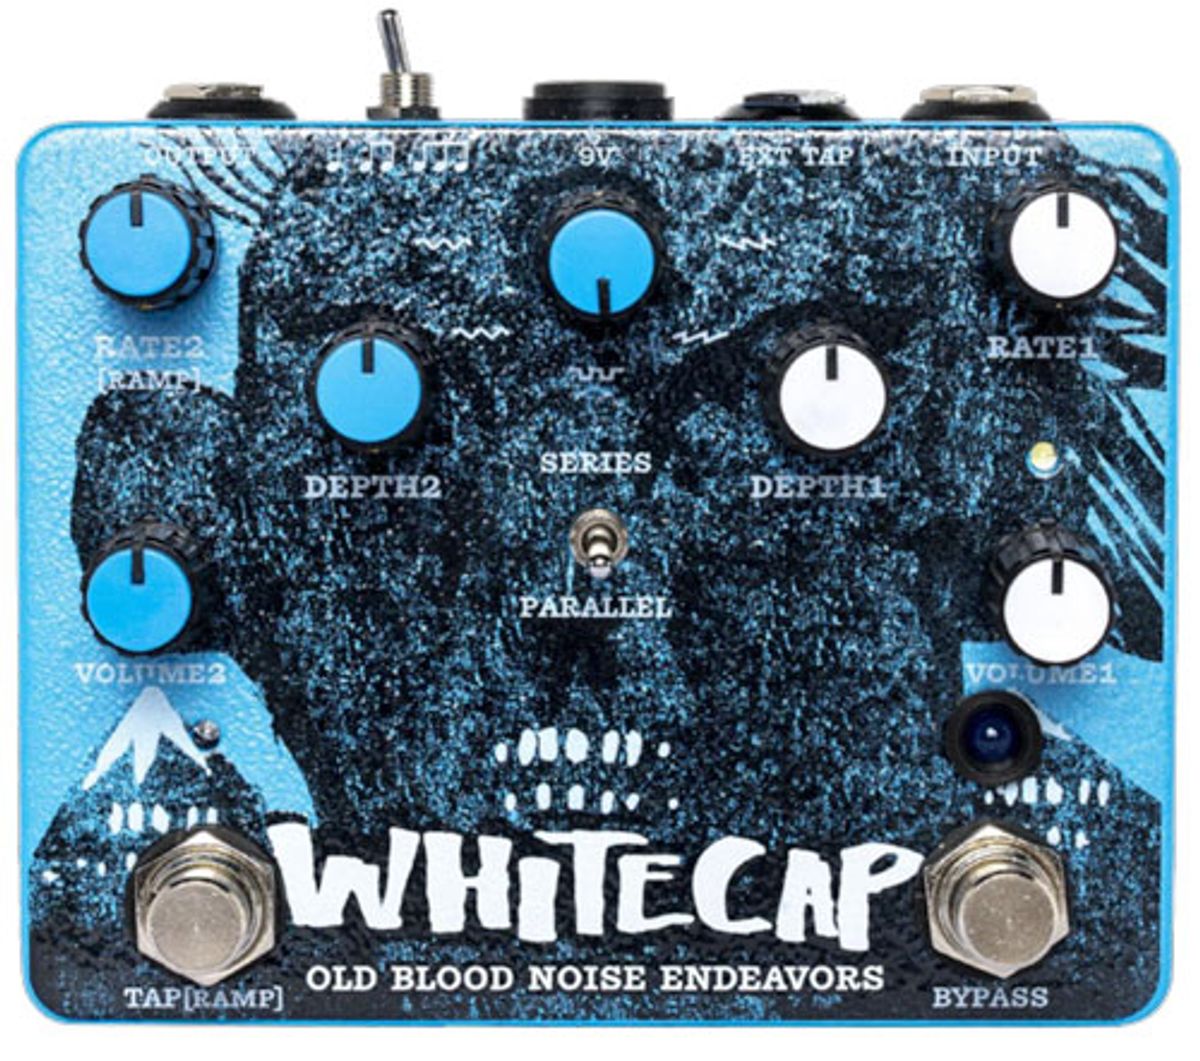 Old Blood Noise Endeavors Introduces the Whitecap